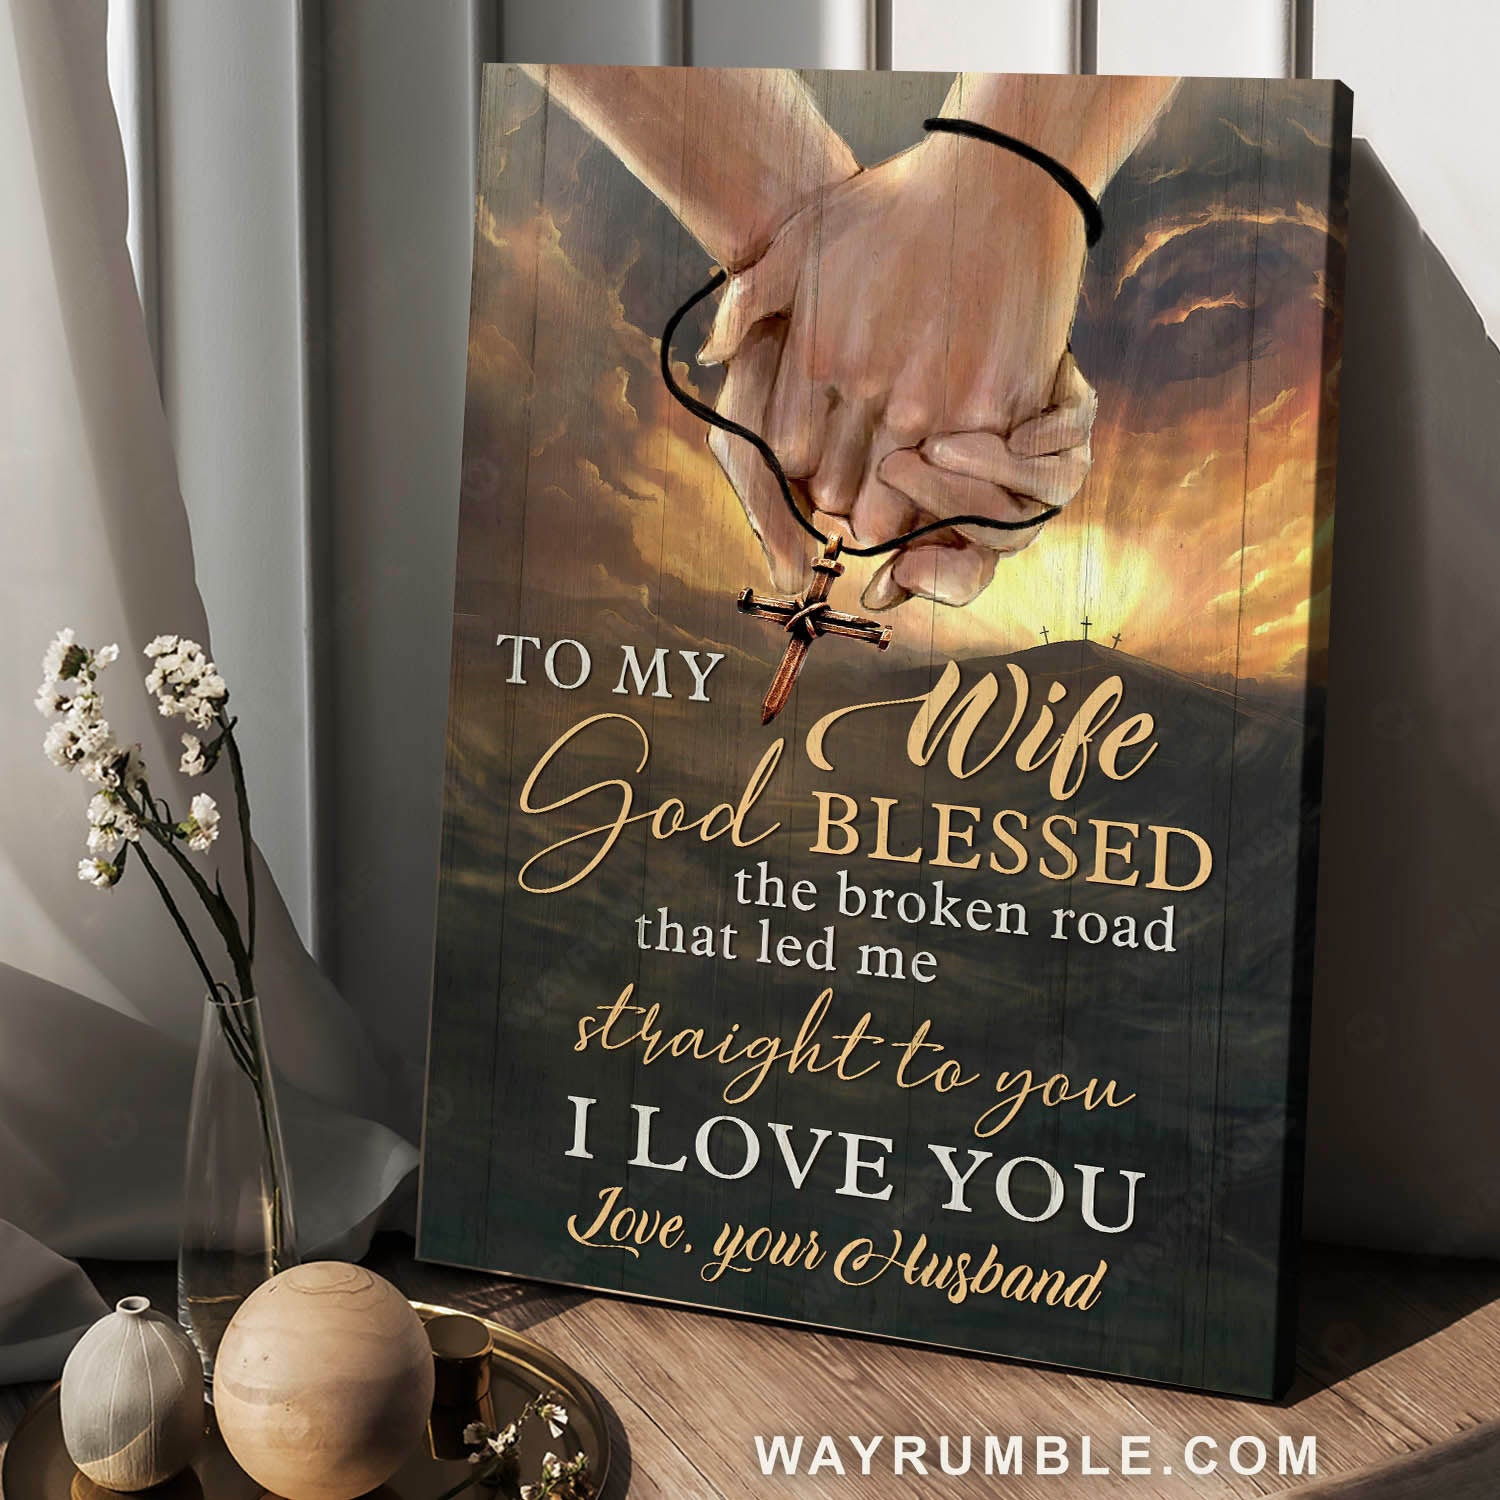 To my wife, Hand in hand, Cross symbol, I love you - Family Portrait Canvas Prints, Wall Art